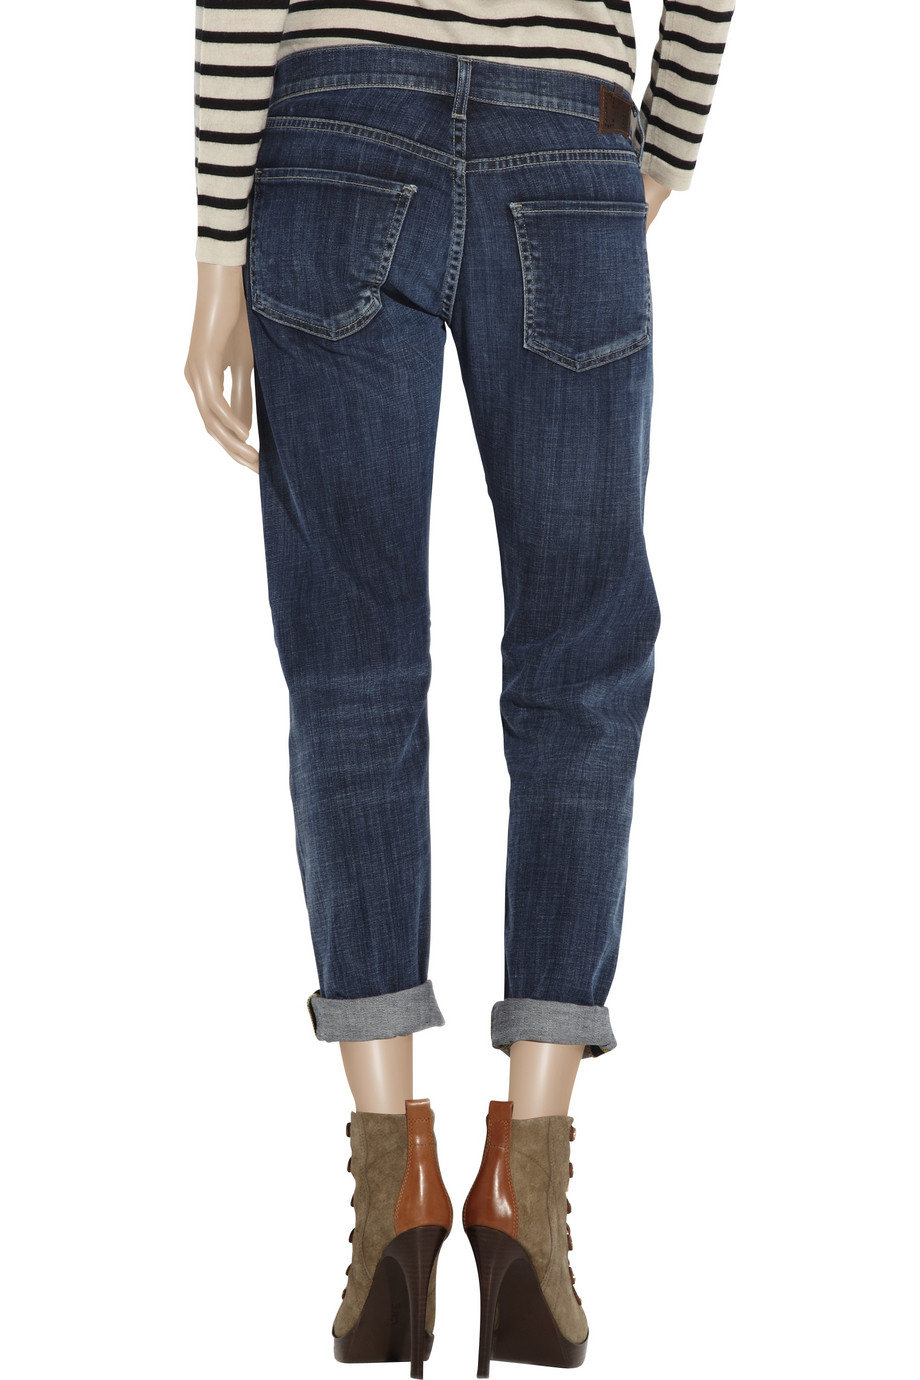 Lyst - Citizens Of Humanity Emerson Mid-rise Slim Boyfriend Jeans in Blue